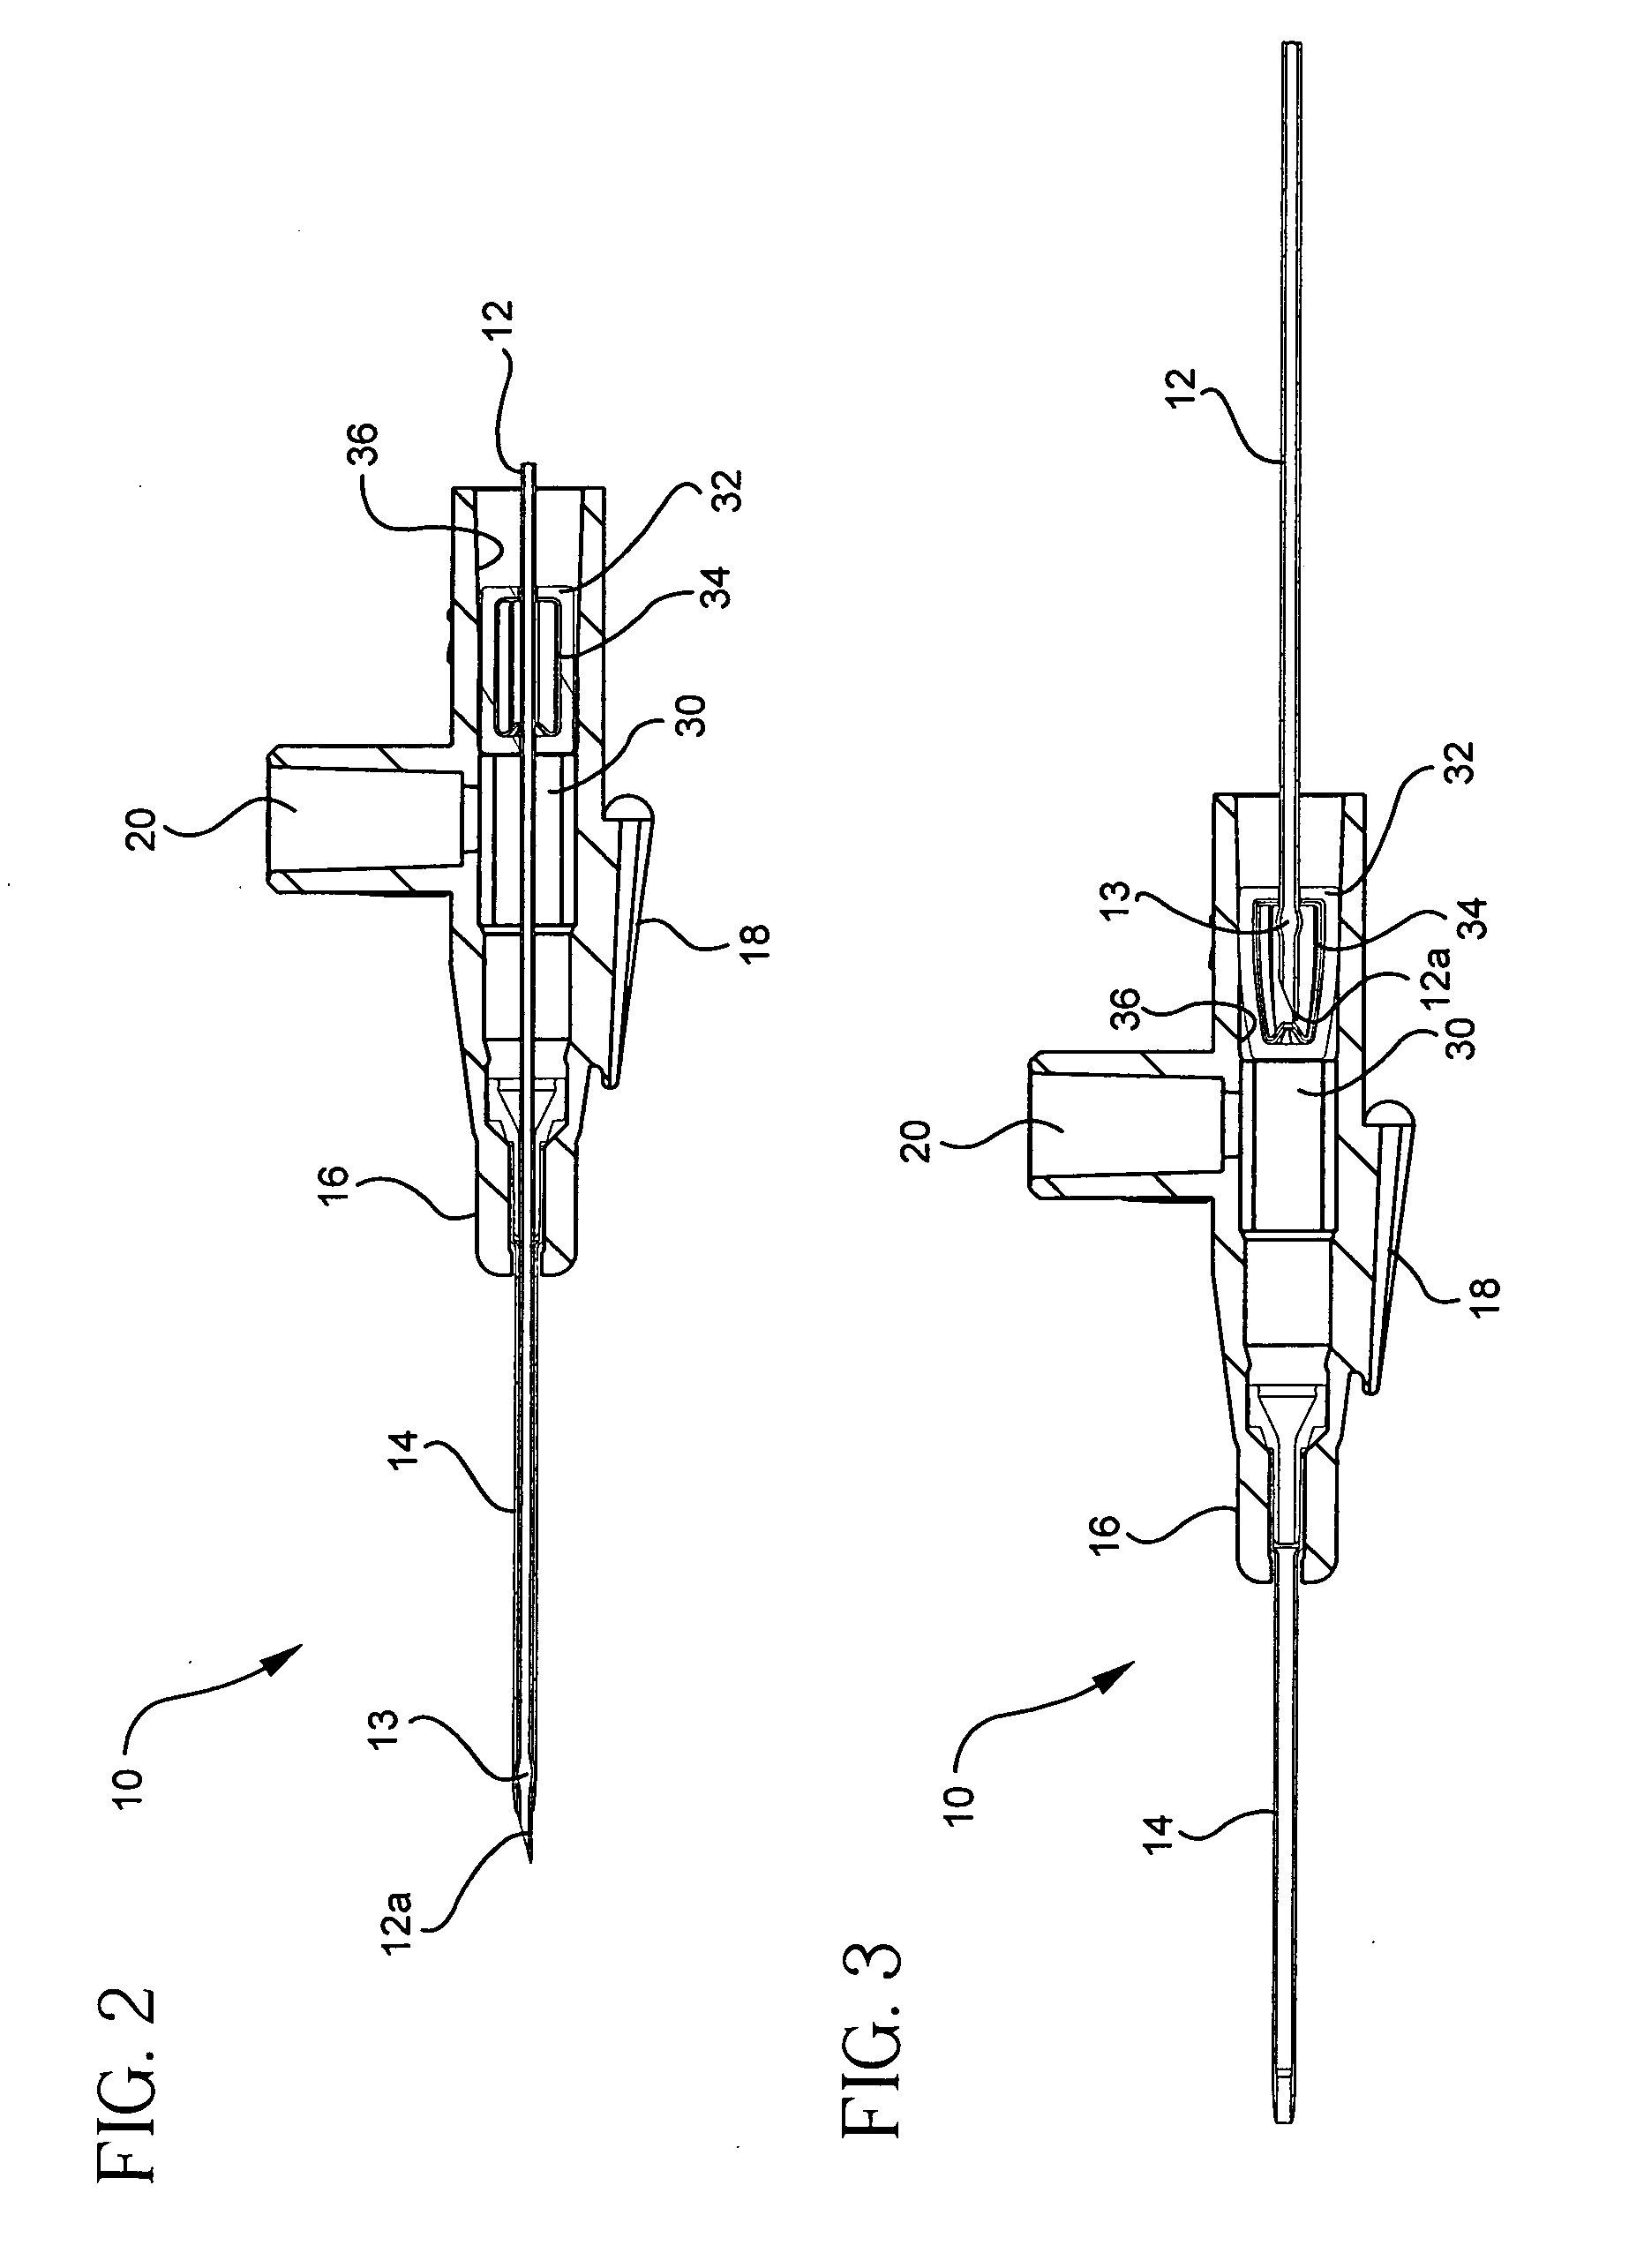 Integrated septum and needle tip shield for a catheter assembly